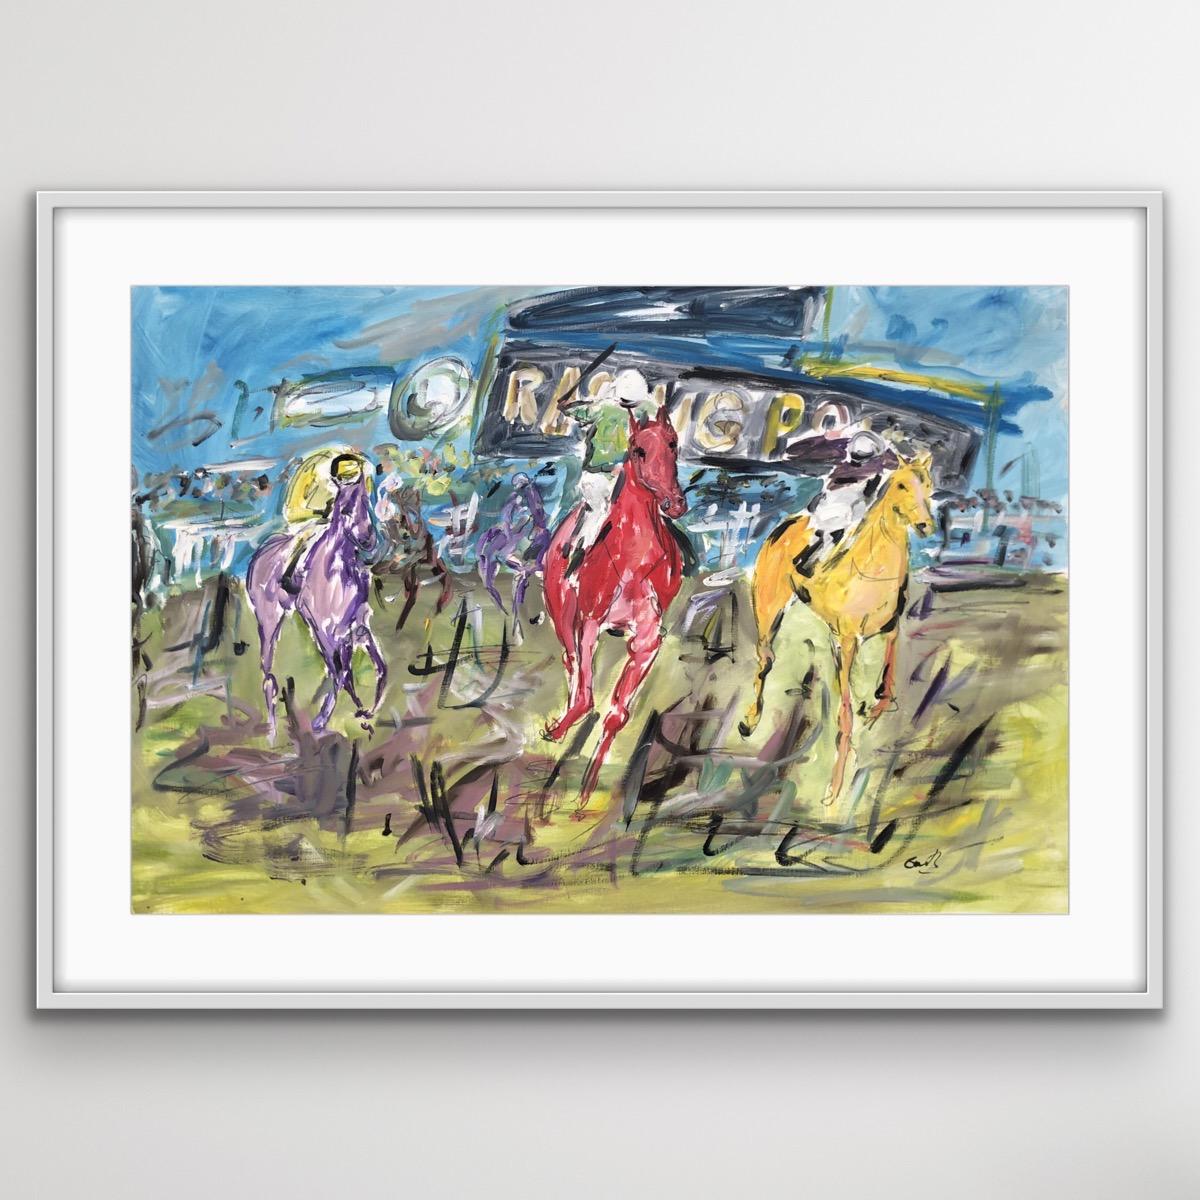 Cheltenham Races is an original painting by Garth Bayley Based on the Cheltenham races. Horses, Horseracing, sport,
The 60 x 90 cm is the image size with extra for framing. The painting Is on high-quality specialist oil paper and will be posted